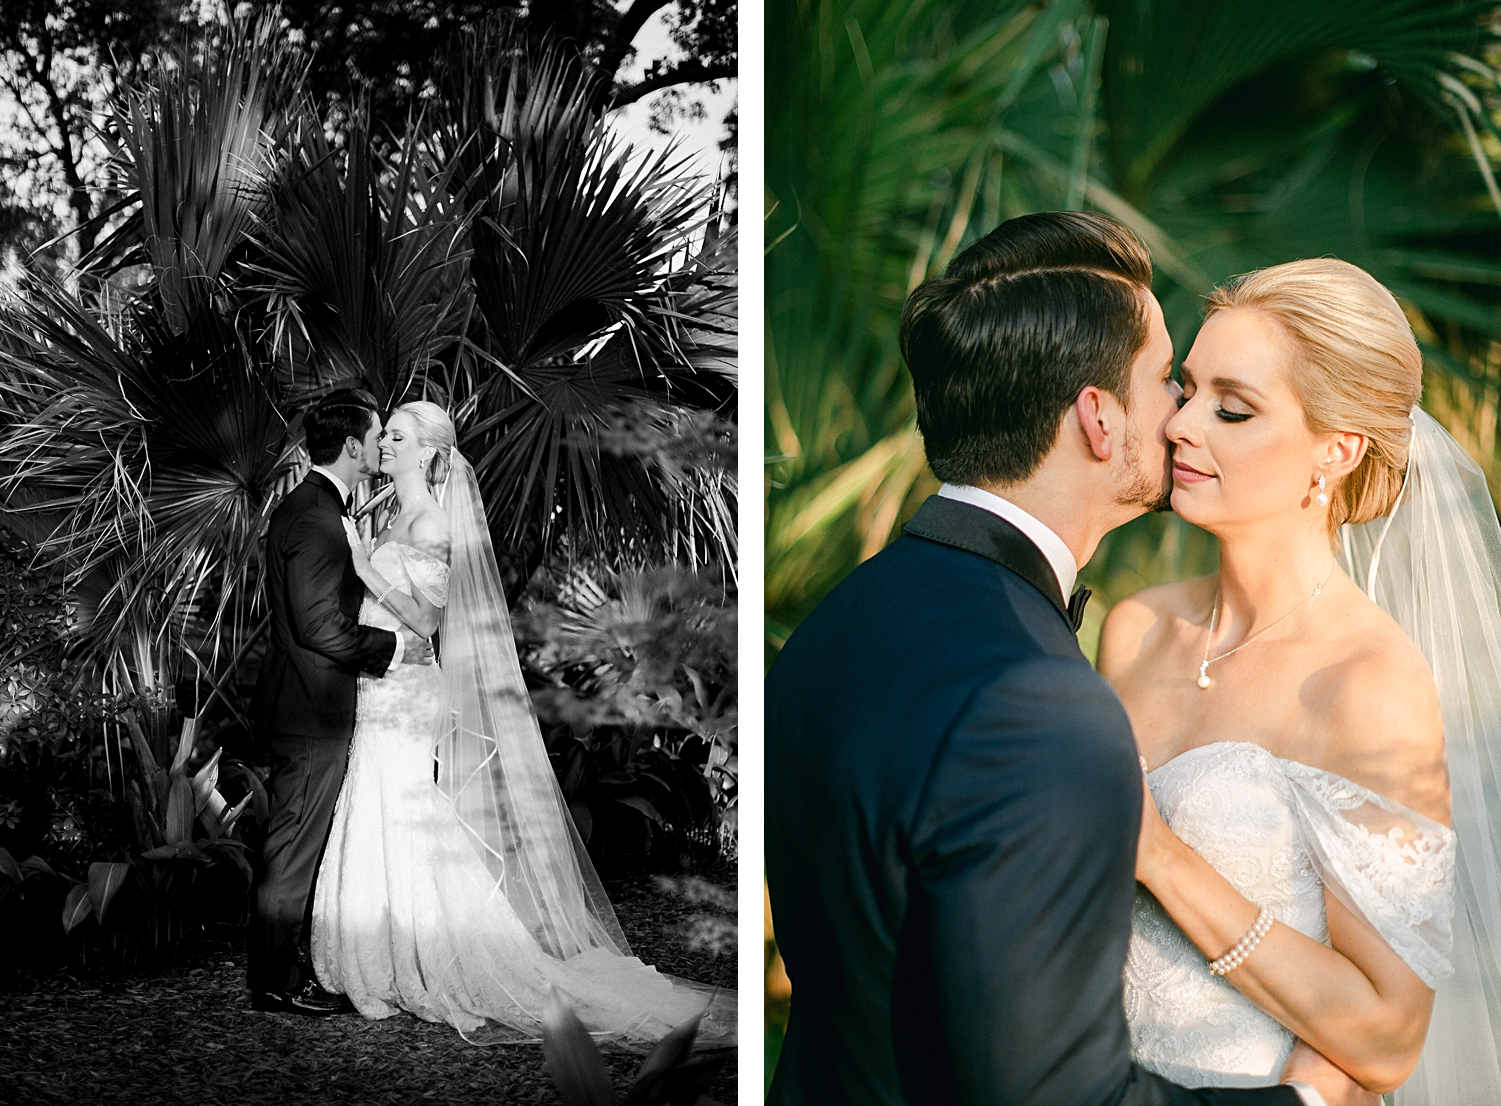 Bride in white wedding dress and veil and Groom in blue tuxedo hugging in green palms